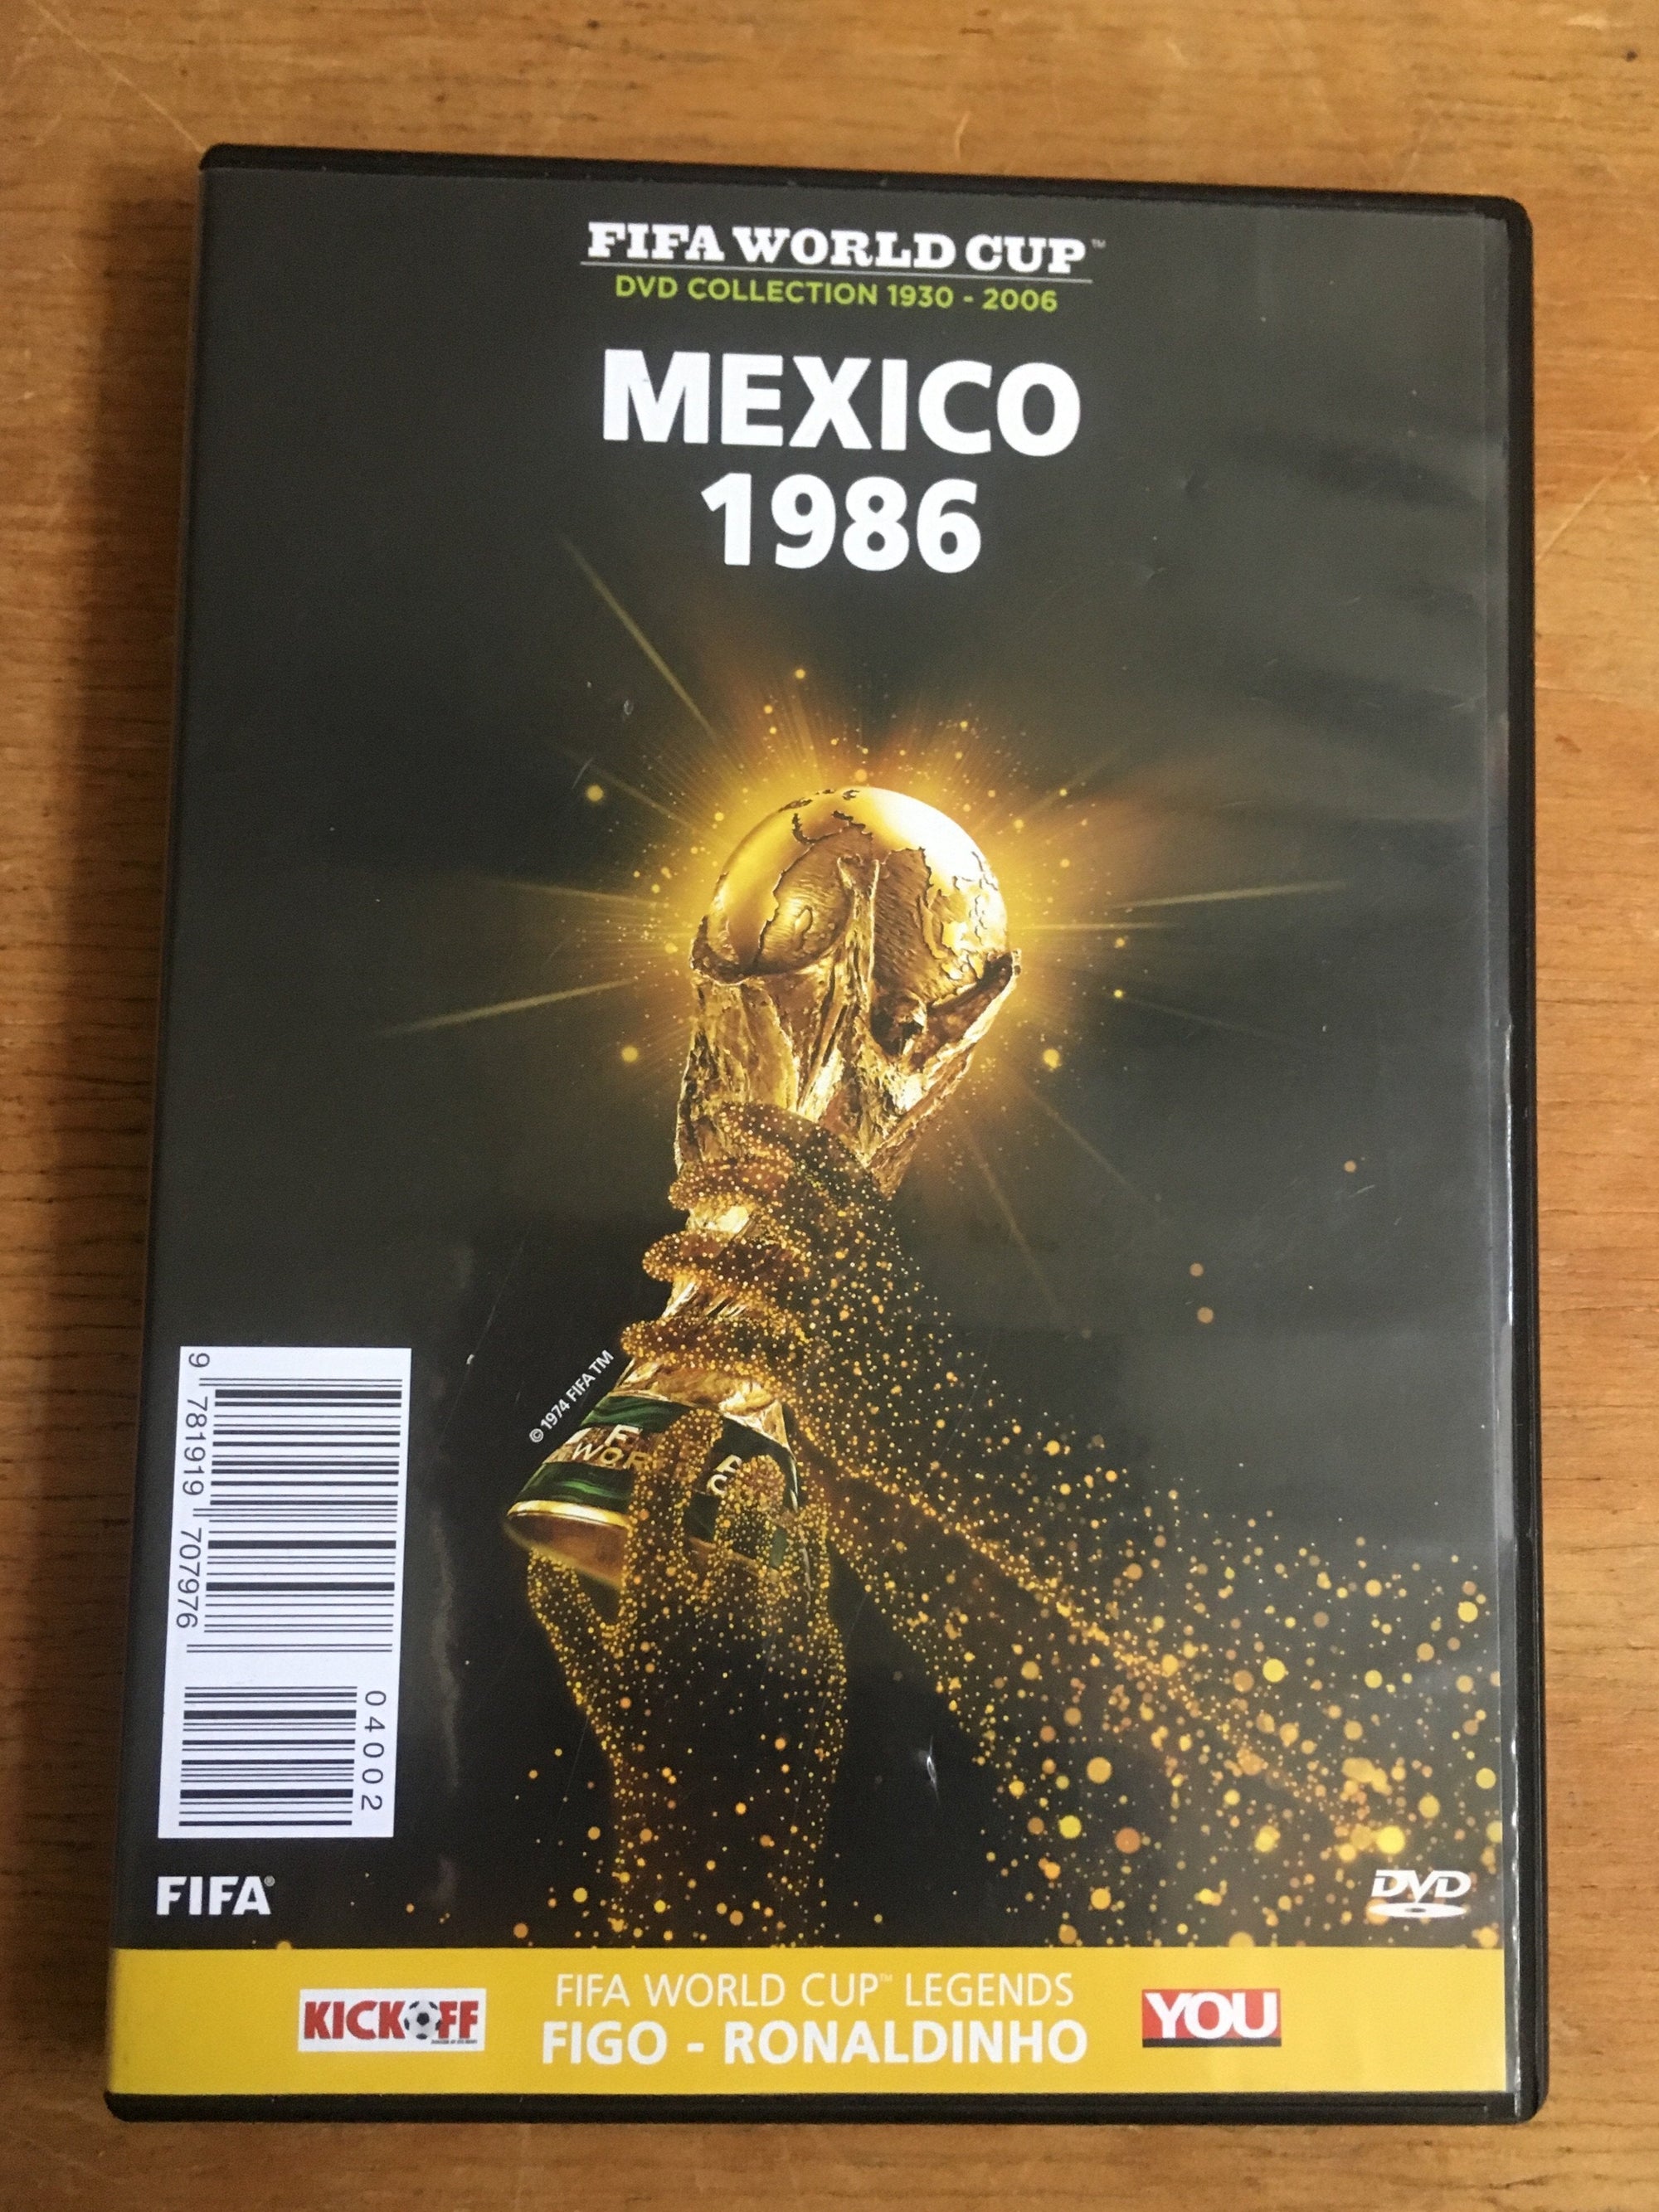 Fifa World Cup Mexico 1986 (DVD) - 2ndhandwarehouse.com